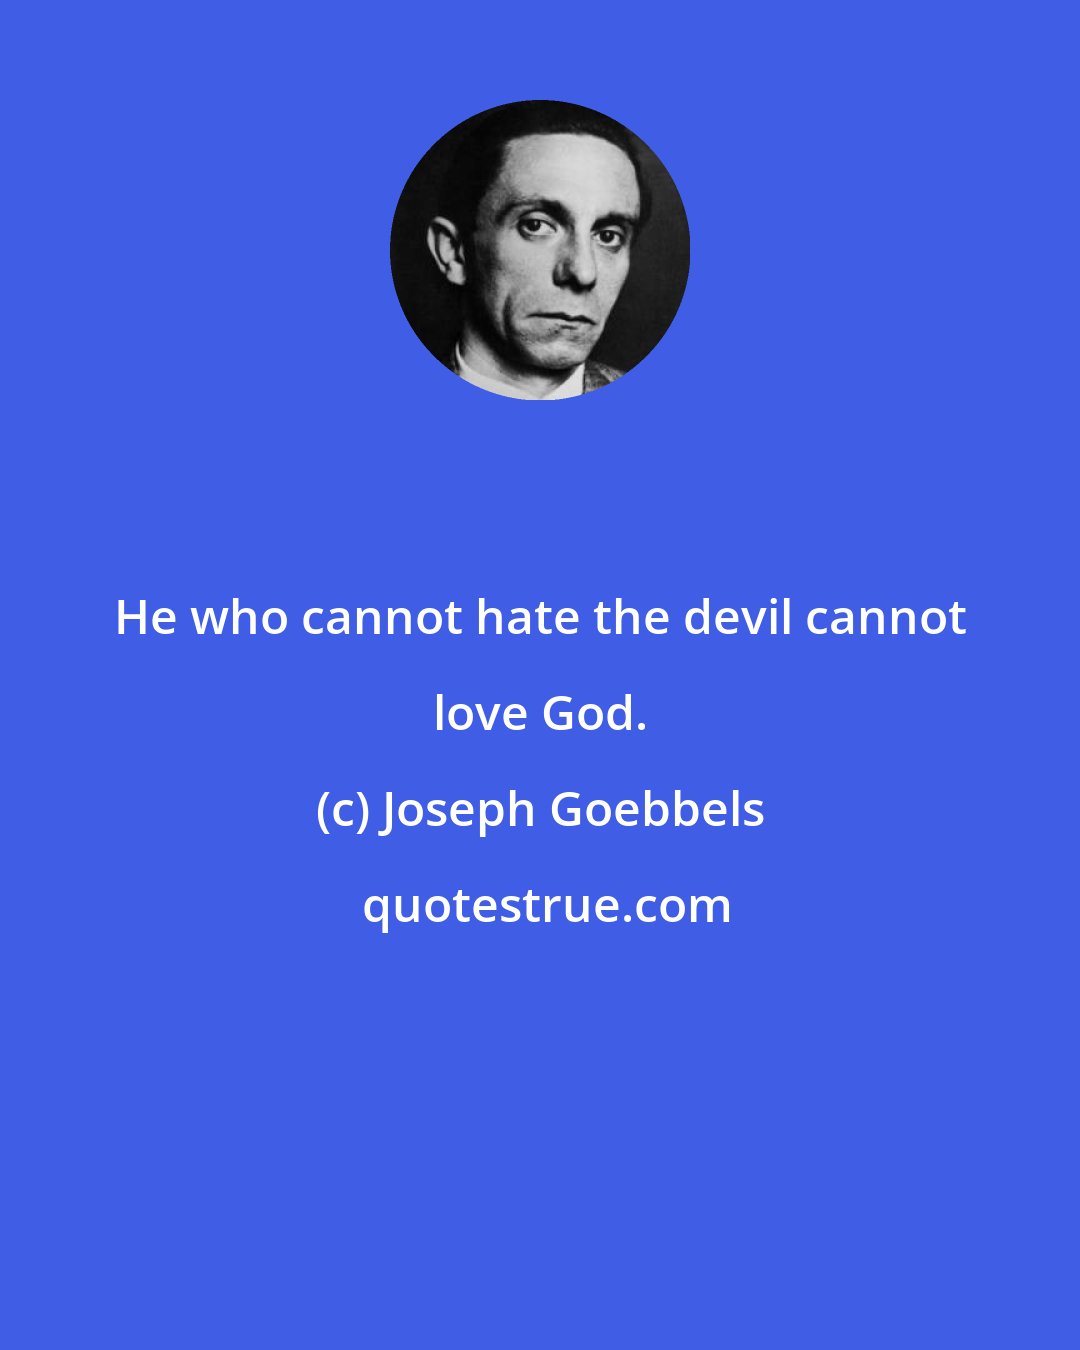 Joseph Goebbels: He who cannot hate the devil cannot love God.